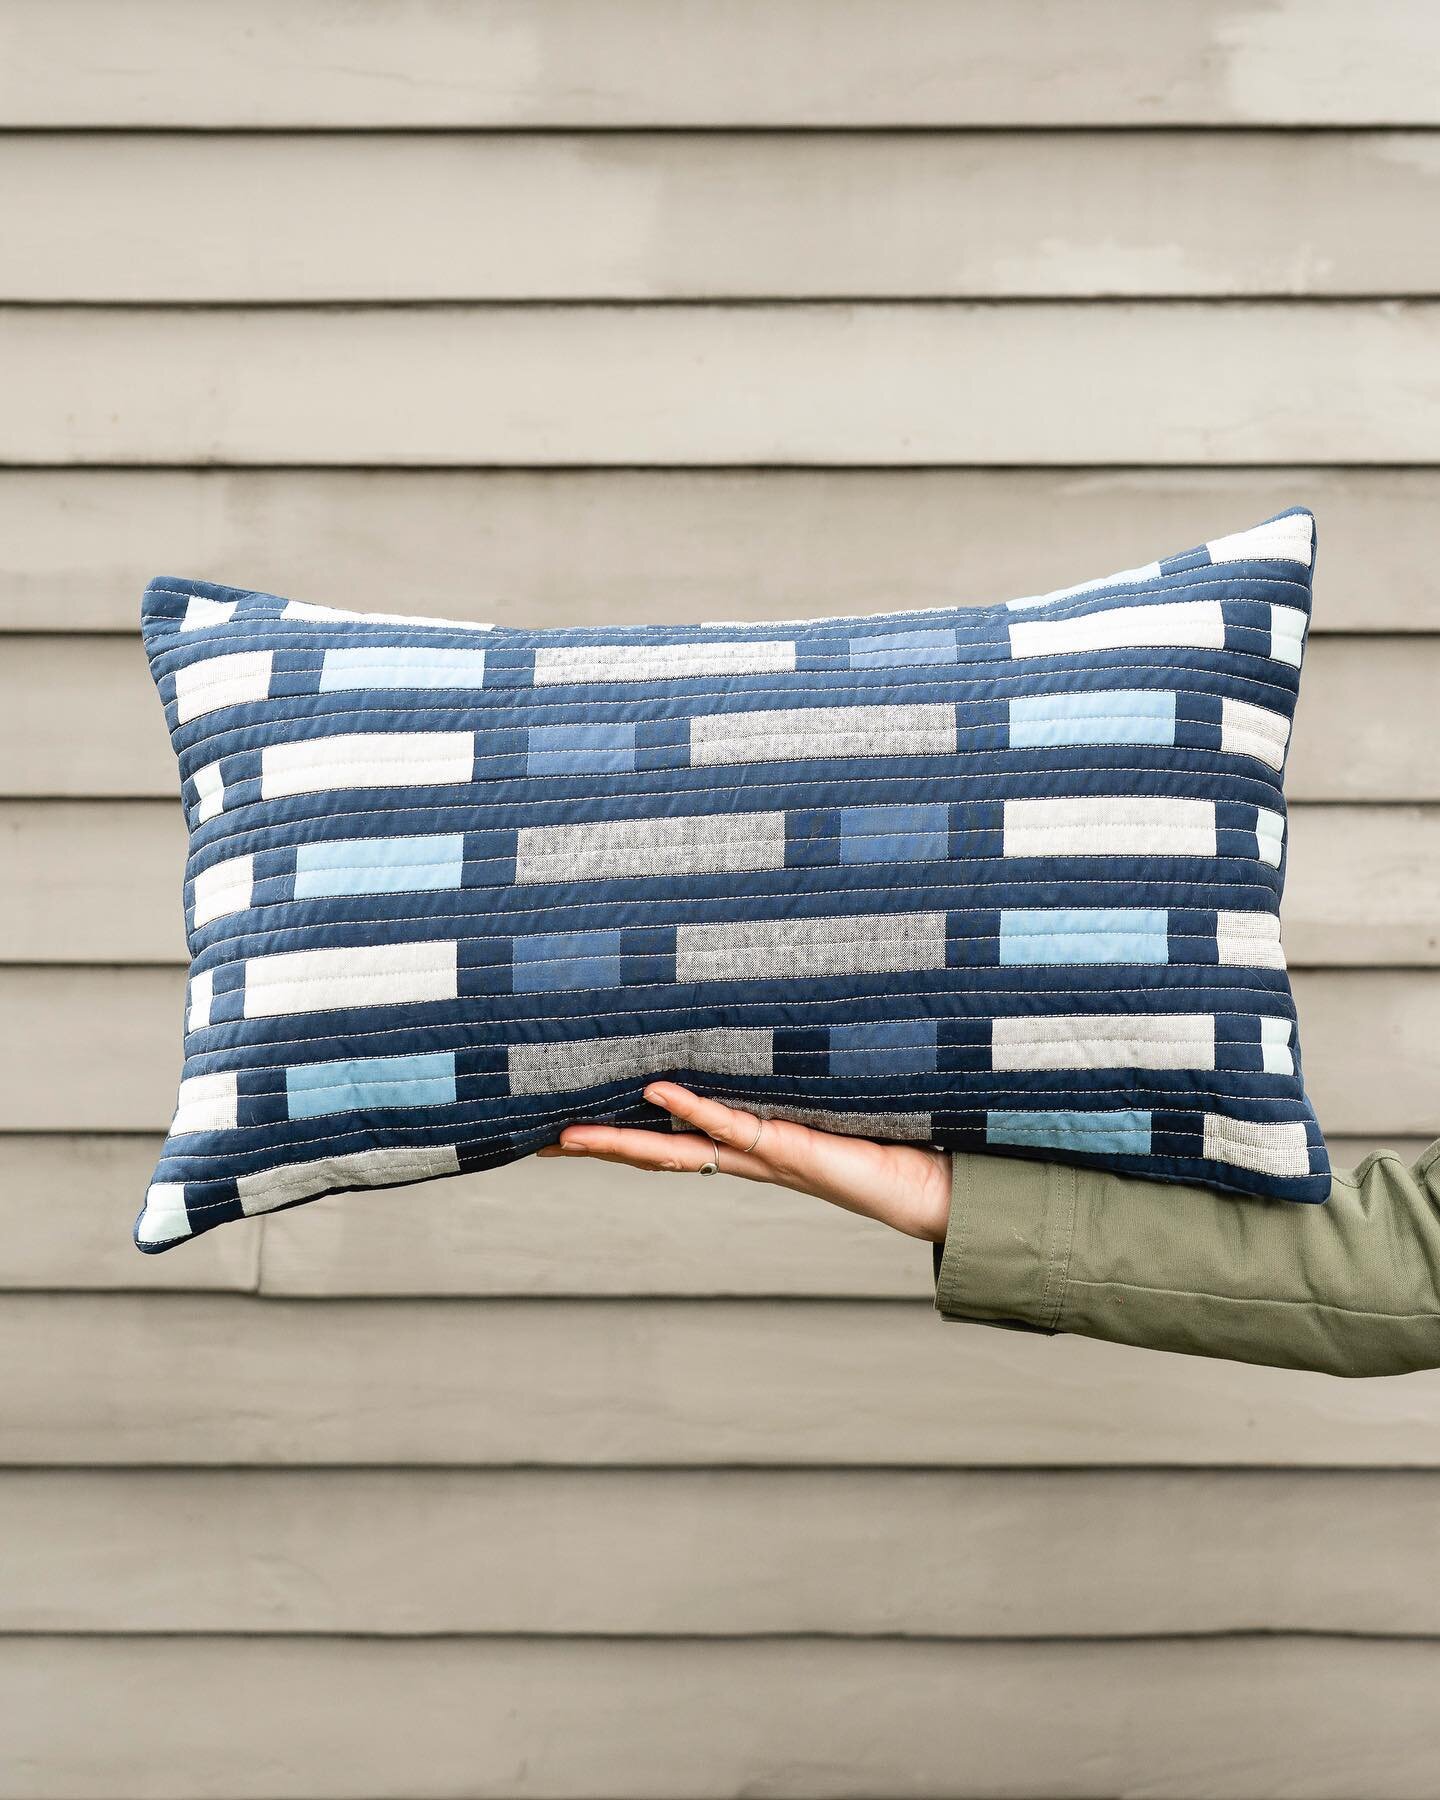 Looking for a quick + easy summer project? ☀️ The Kalaloch Pillow&rsquo;s design looks complex but the construction is simple making it the perfect weekend #DIY 🙌

Shop the Kalaloch pattern on our website and head over to @materialgoods_ for fabric 